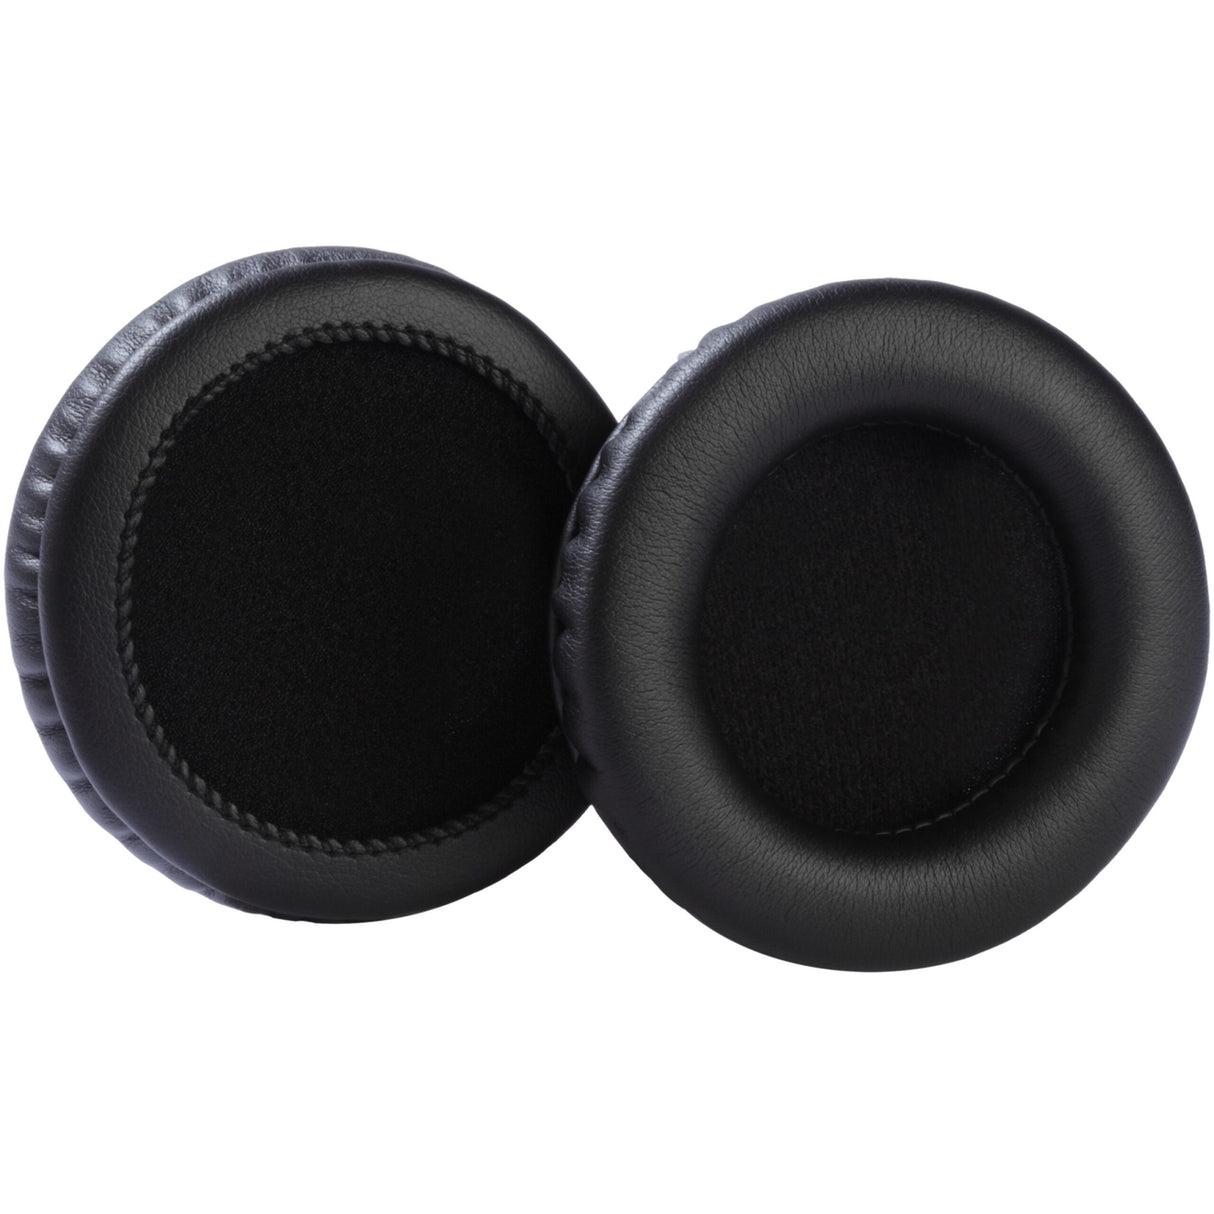 Shure HPAEC750 Replacement Ear Cushions for SRH750DJ